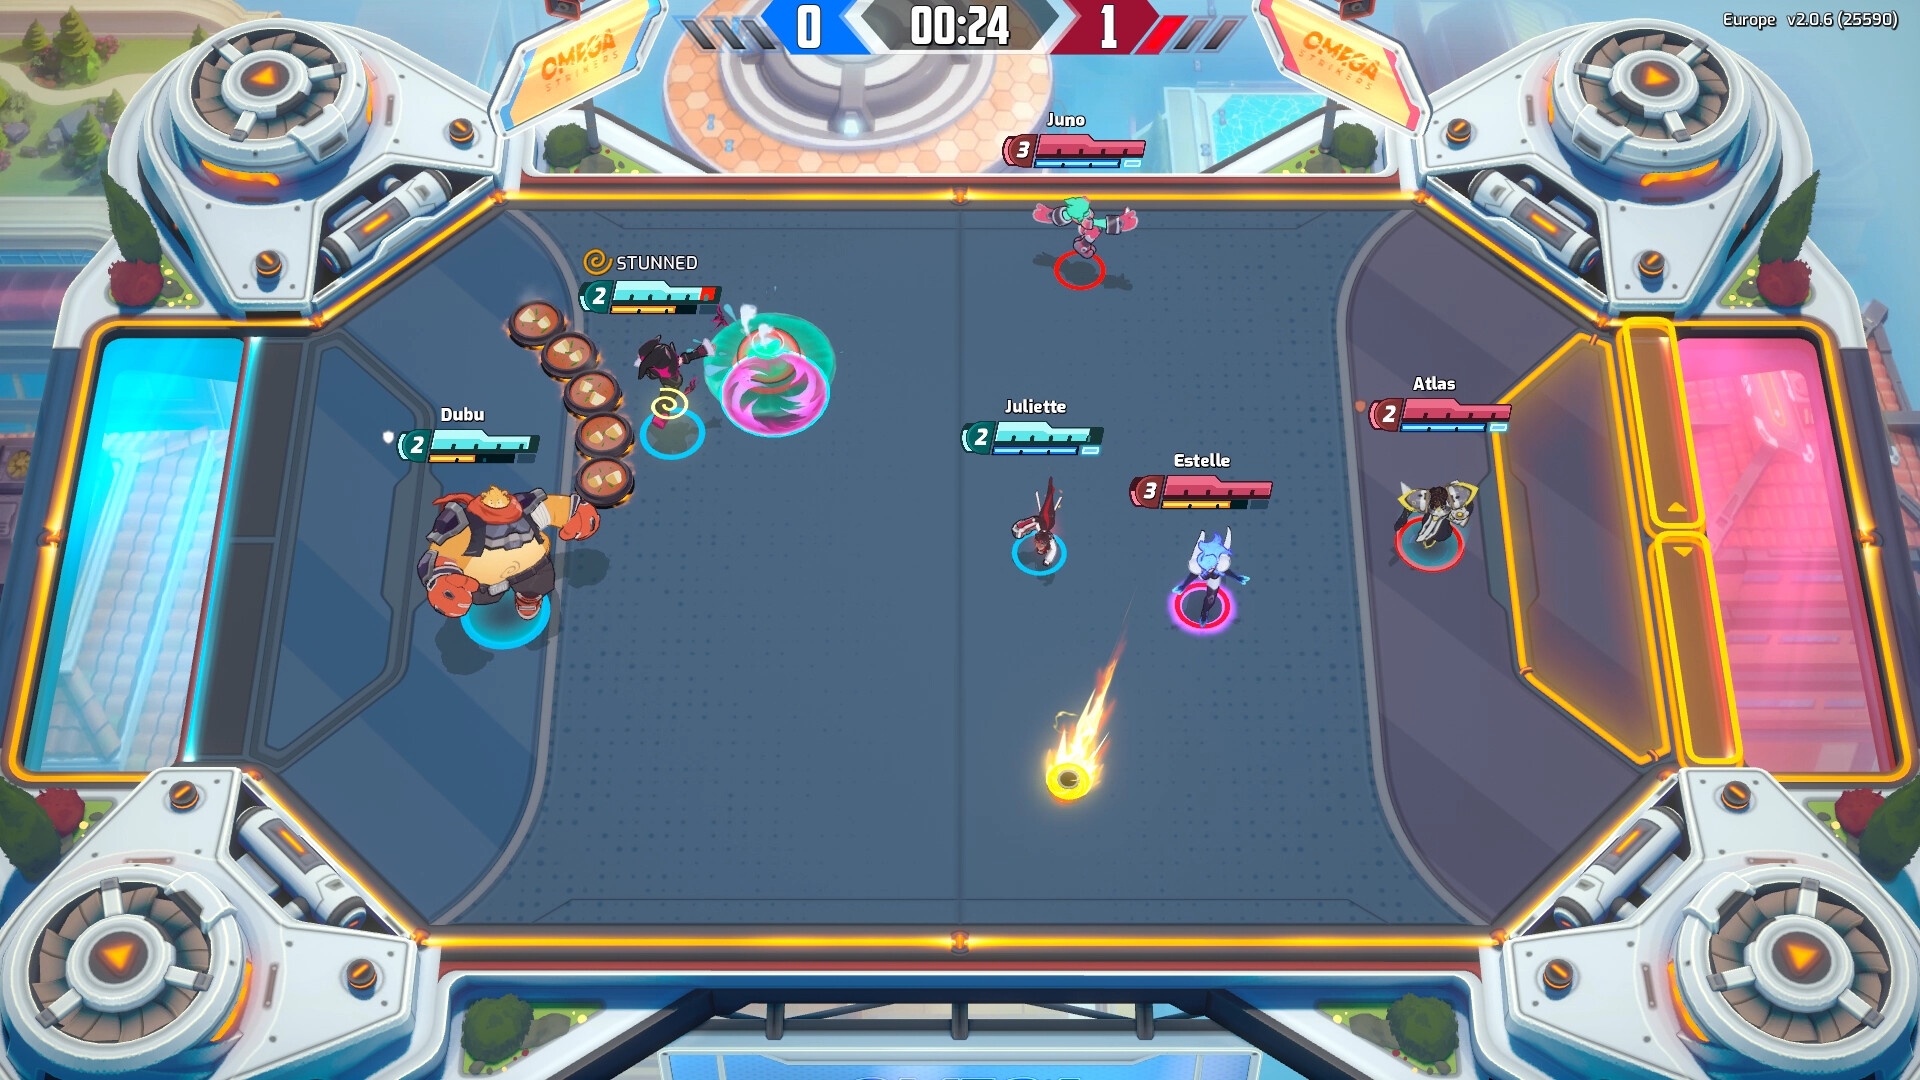 Omega Strikers - Former devs from Riot Games launch 3 vs 3 arena game on  Steam - MMO Culture